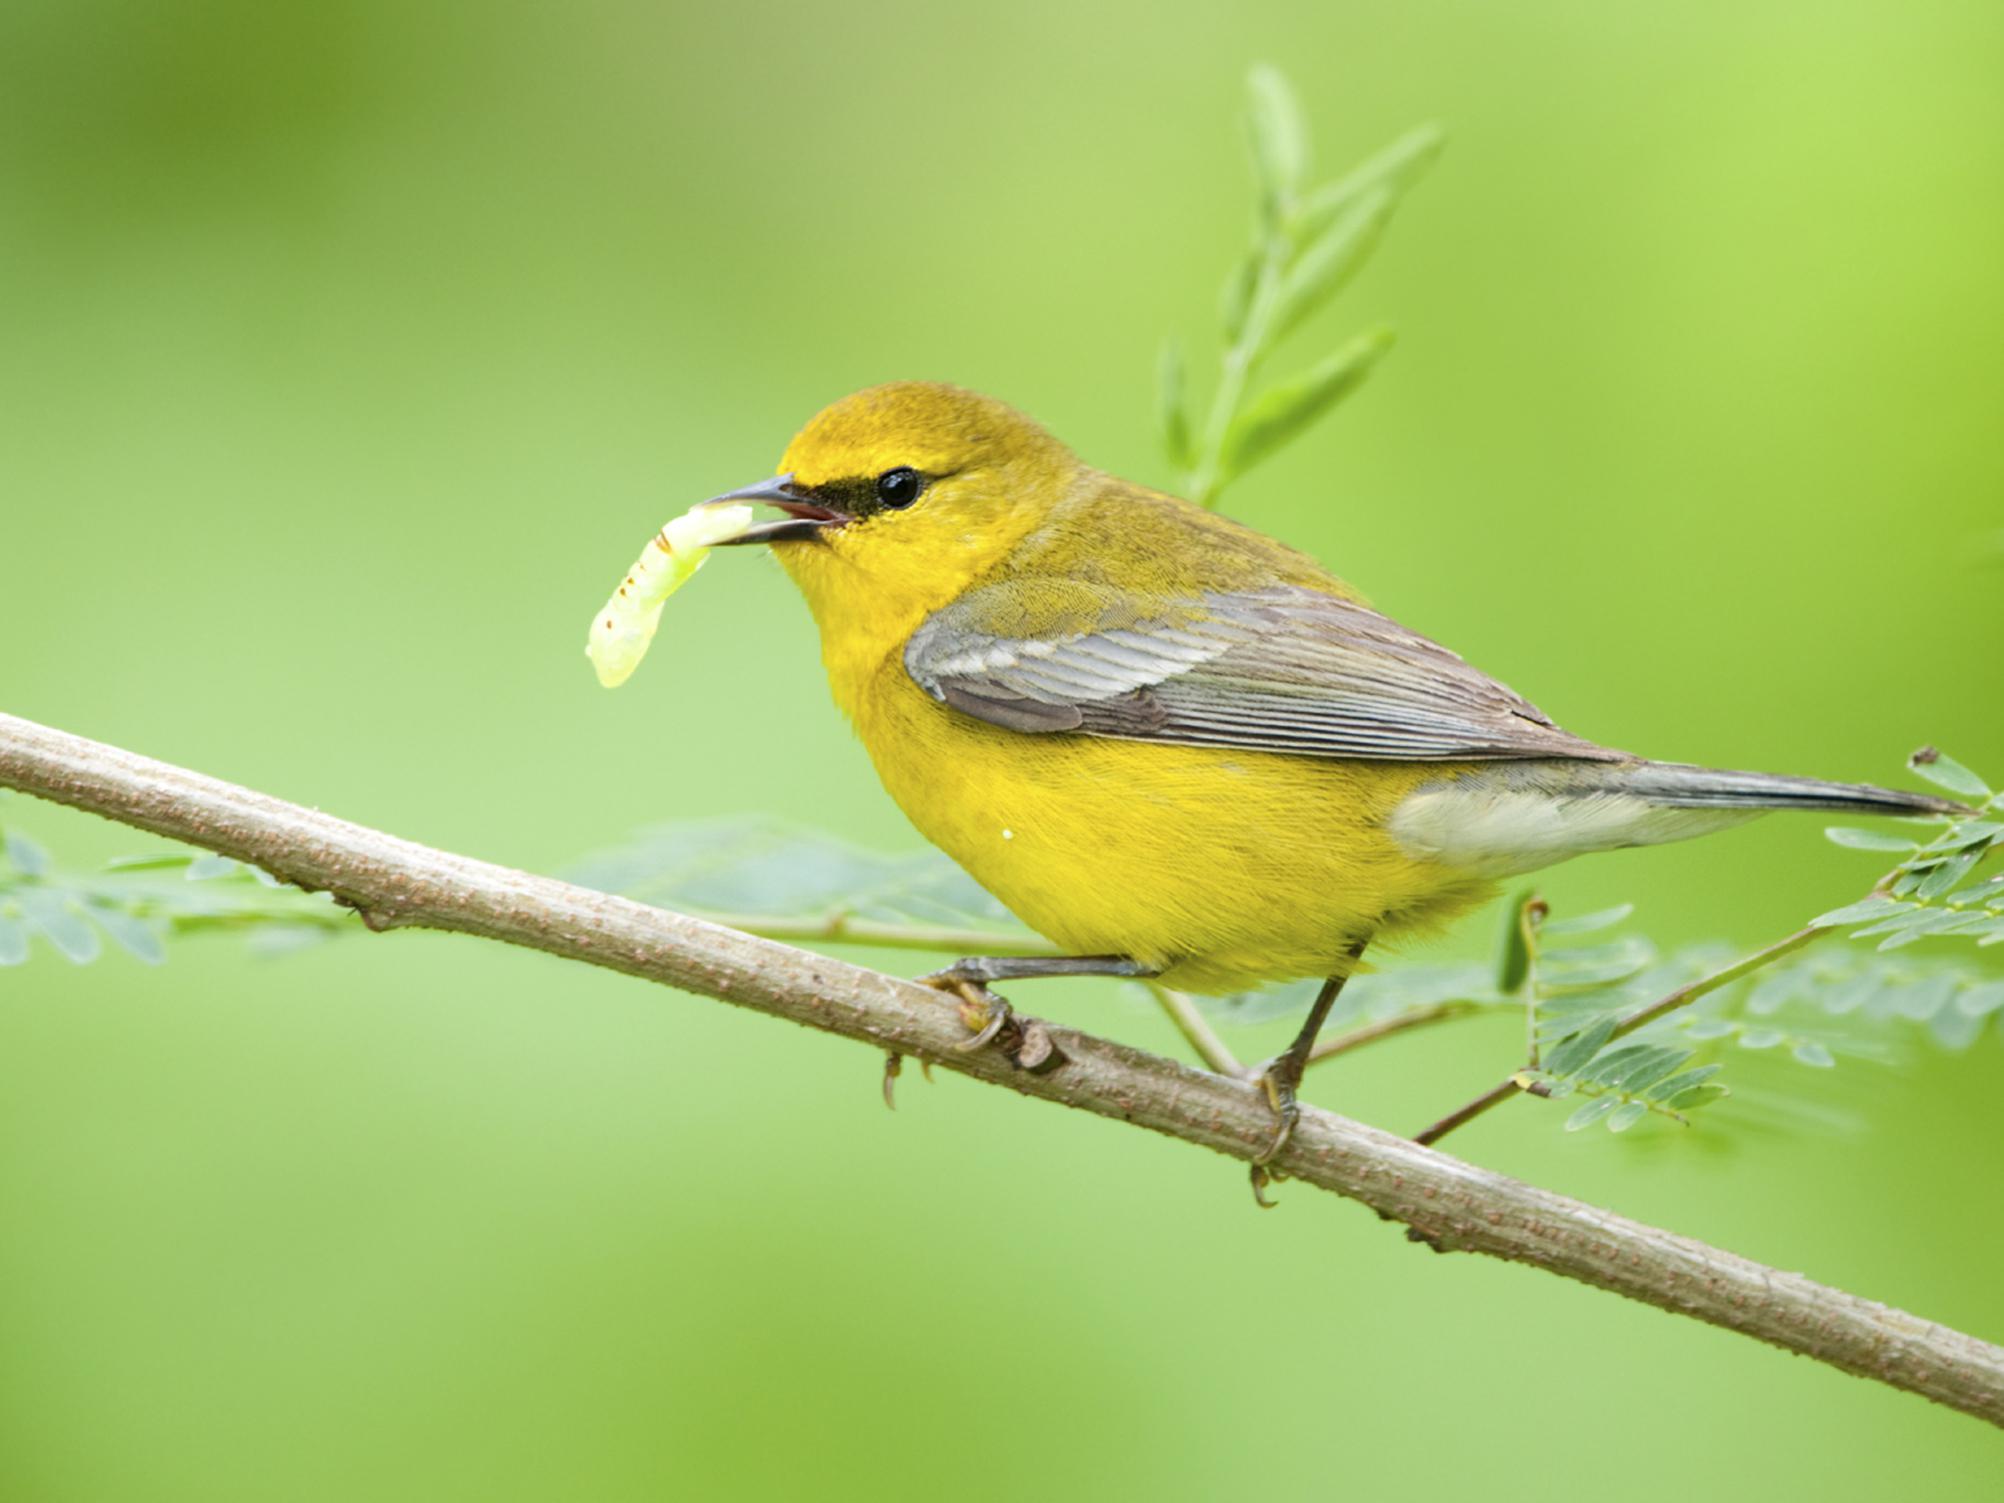 A small yellow bird holding a worm in its beak while perched on a small tree branch.